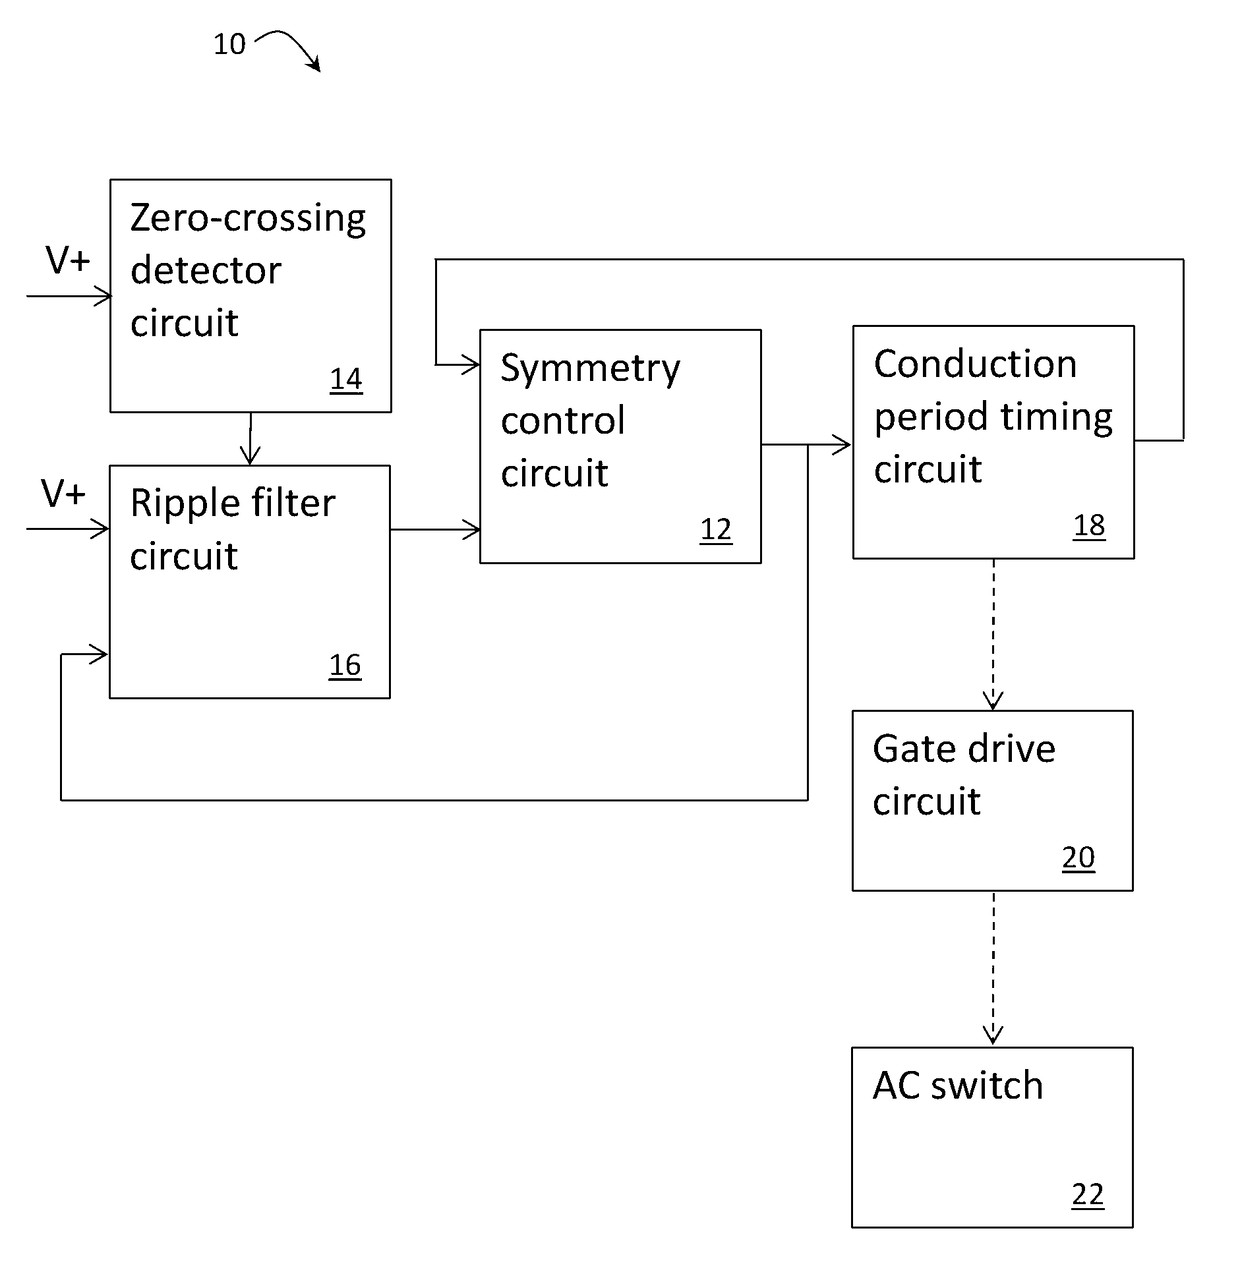 Symmetry control circuit of a trailing edge phase control dimmer circuit